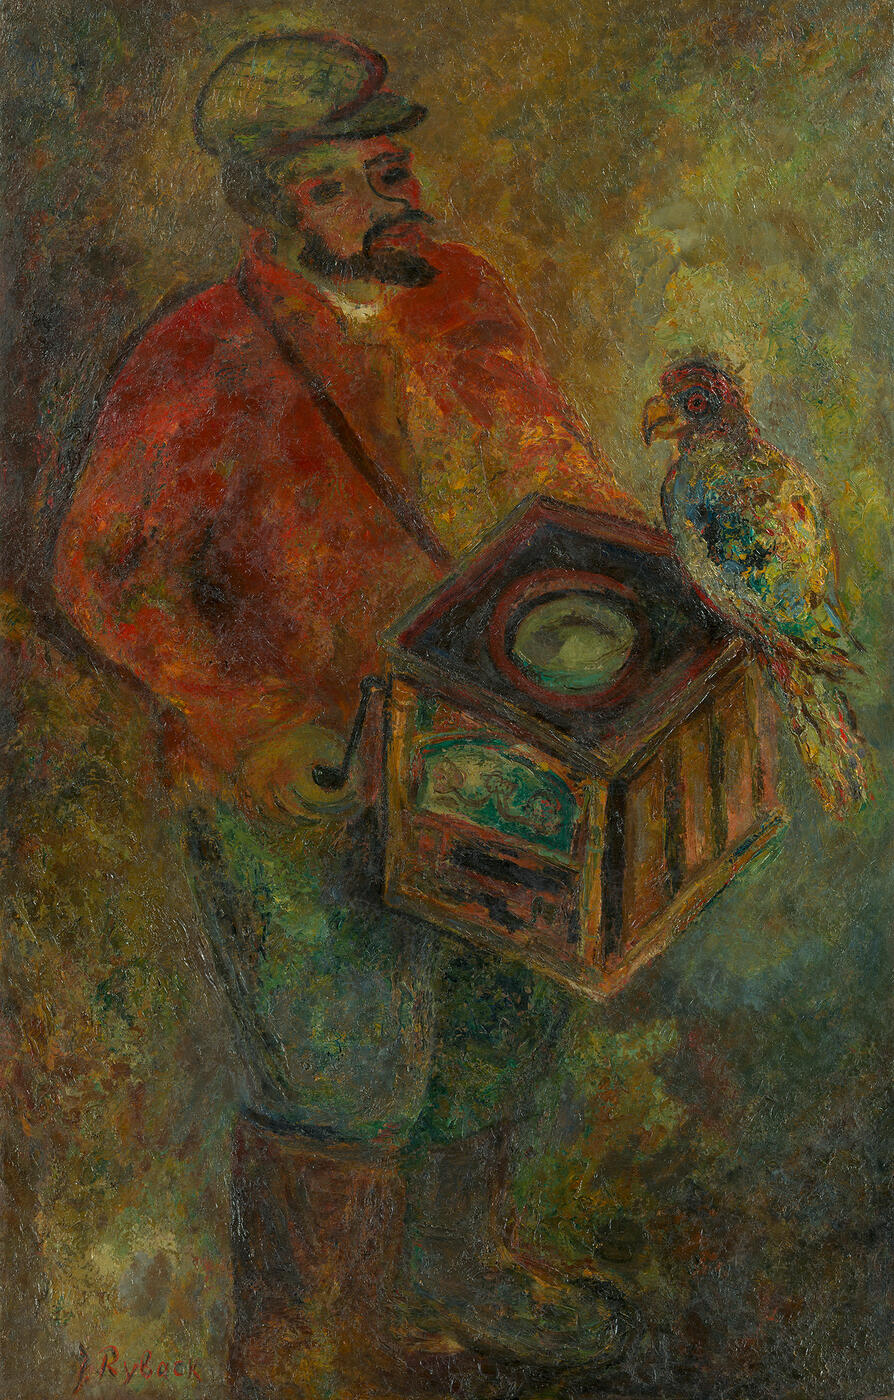 Organ Grinder with a Parrot